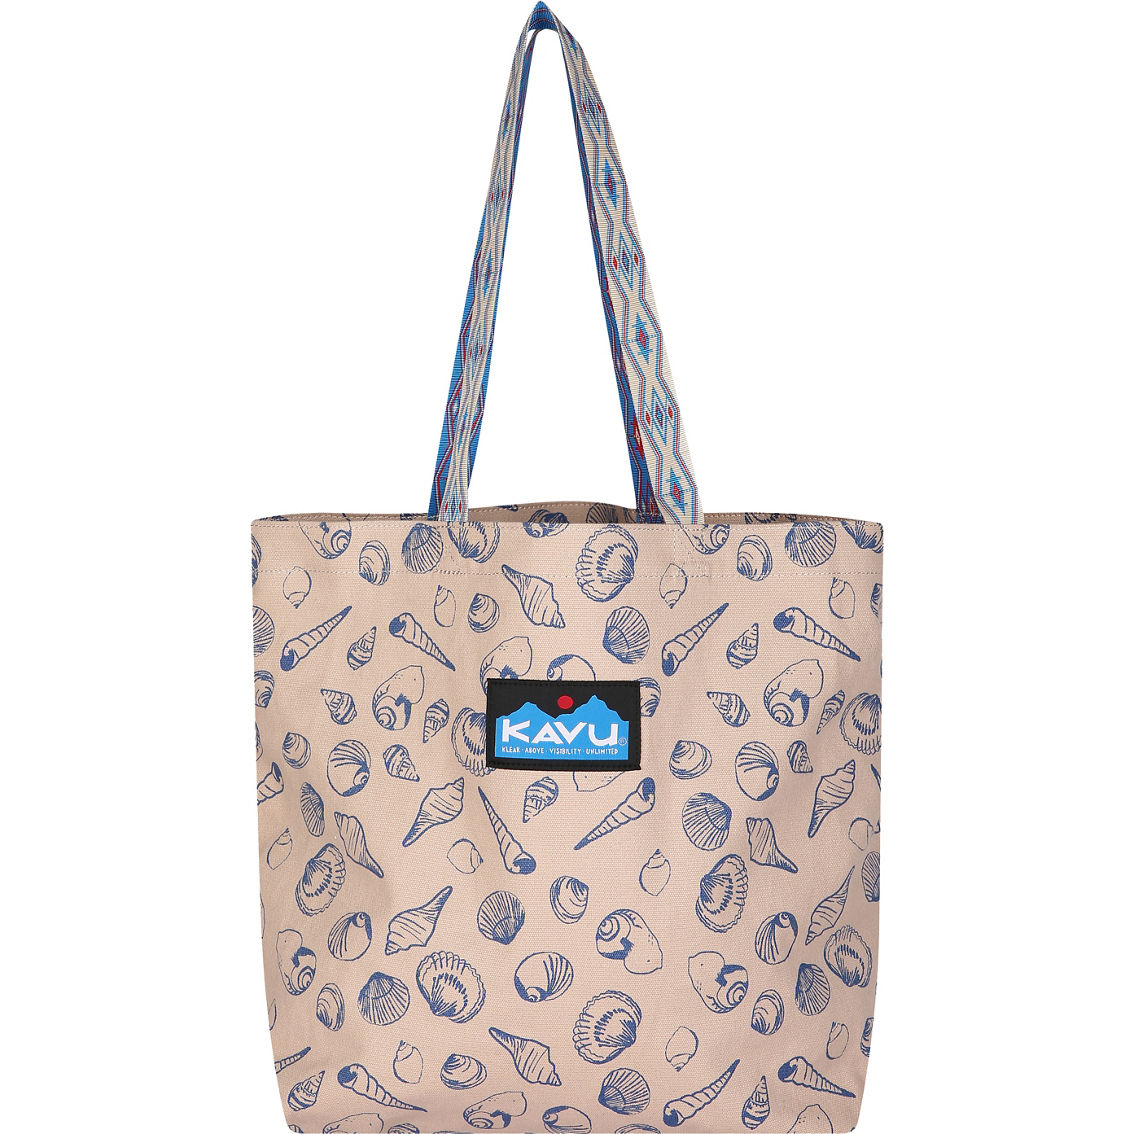 Kavu Shell Life Typical Tote - Image 2 of 3